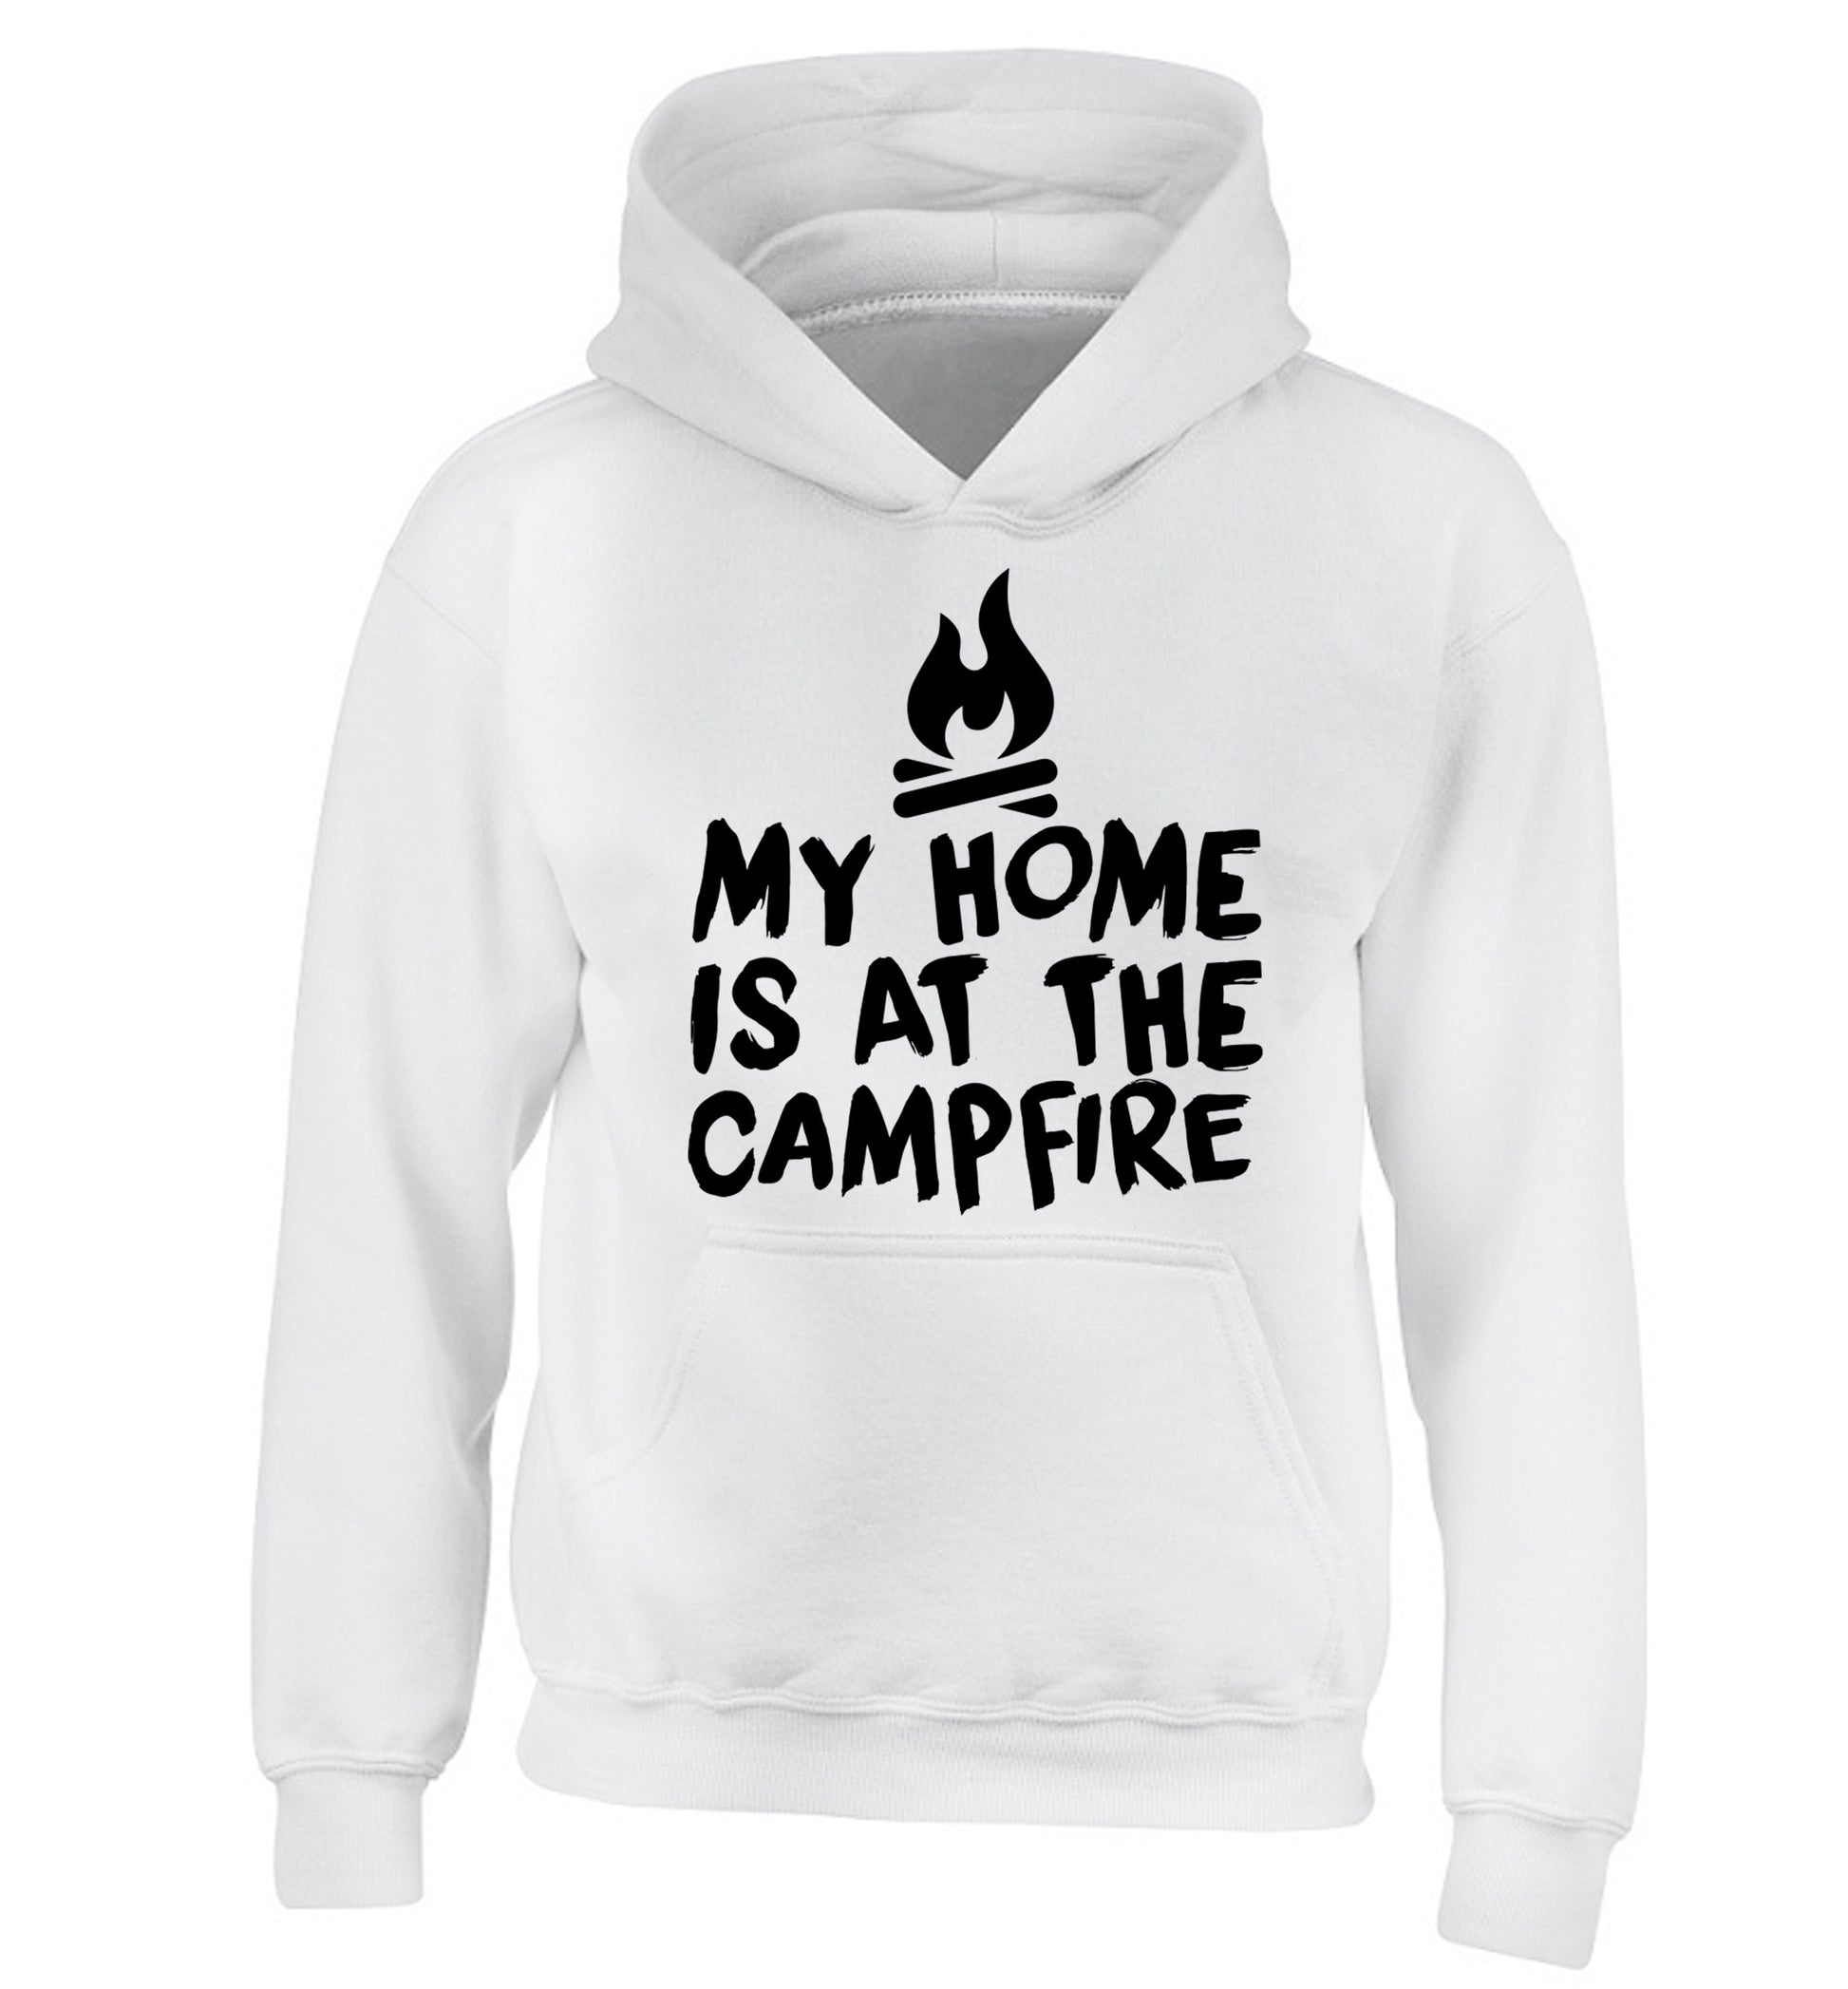 My home is at the campfire children's white hoodie 12-14 Years